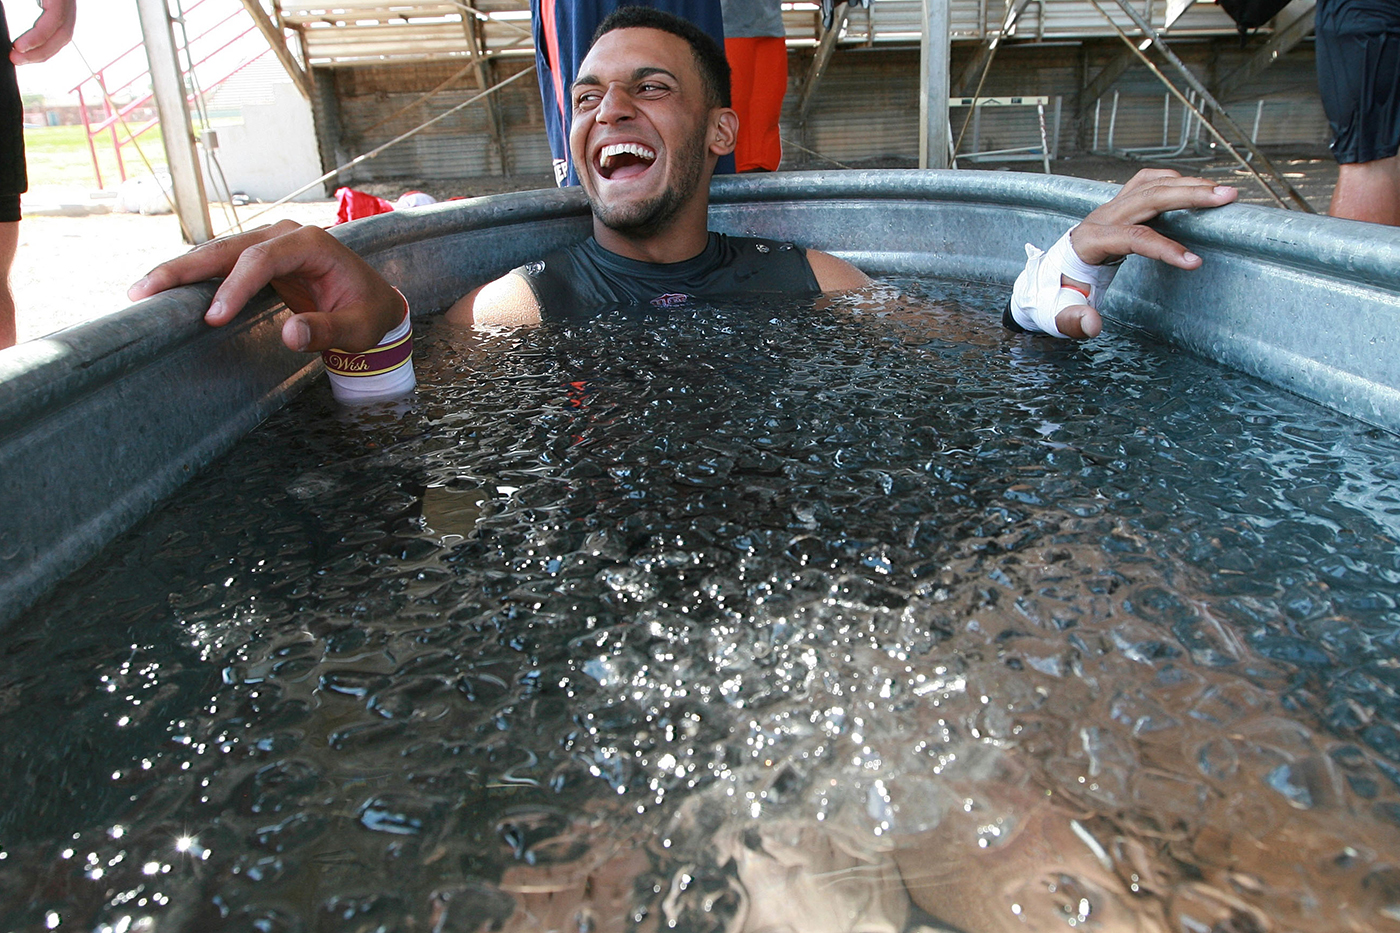 Do Ice Baths Work? Benefits, Risks, and Latest Research